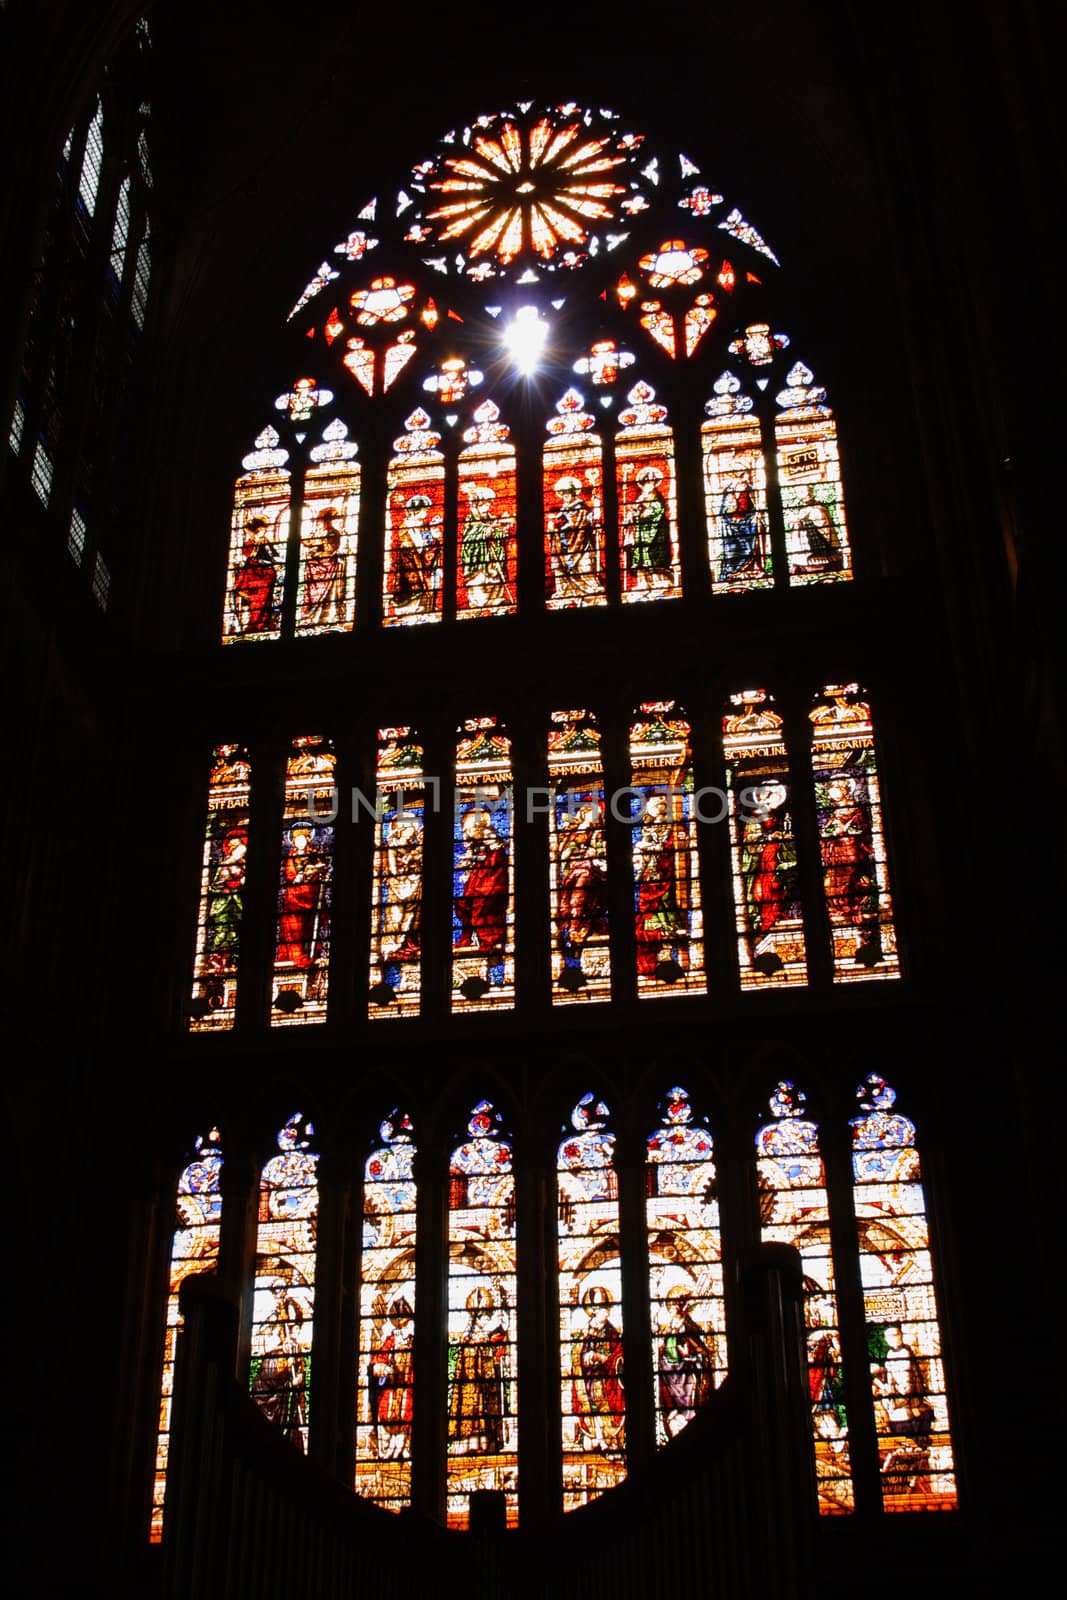 Stained glass window by toneteam